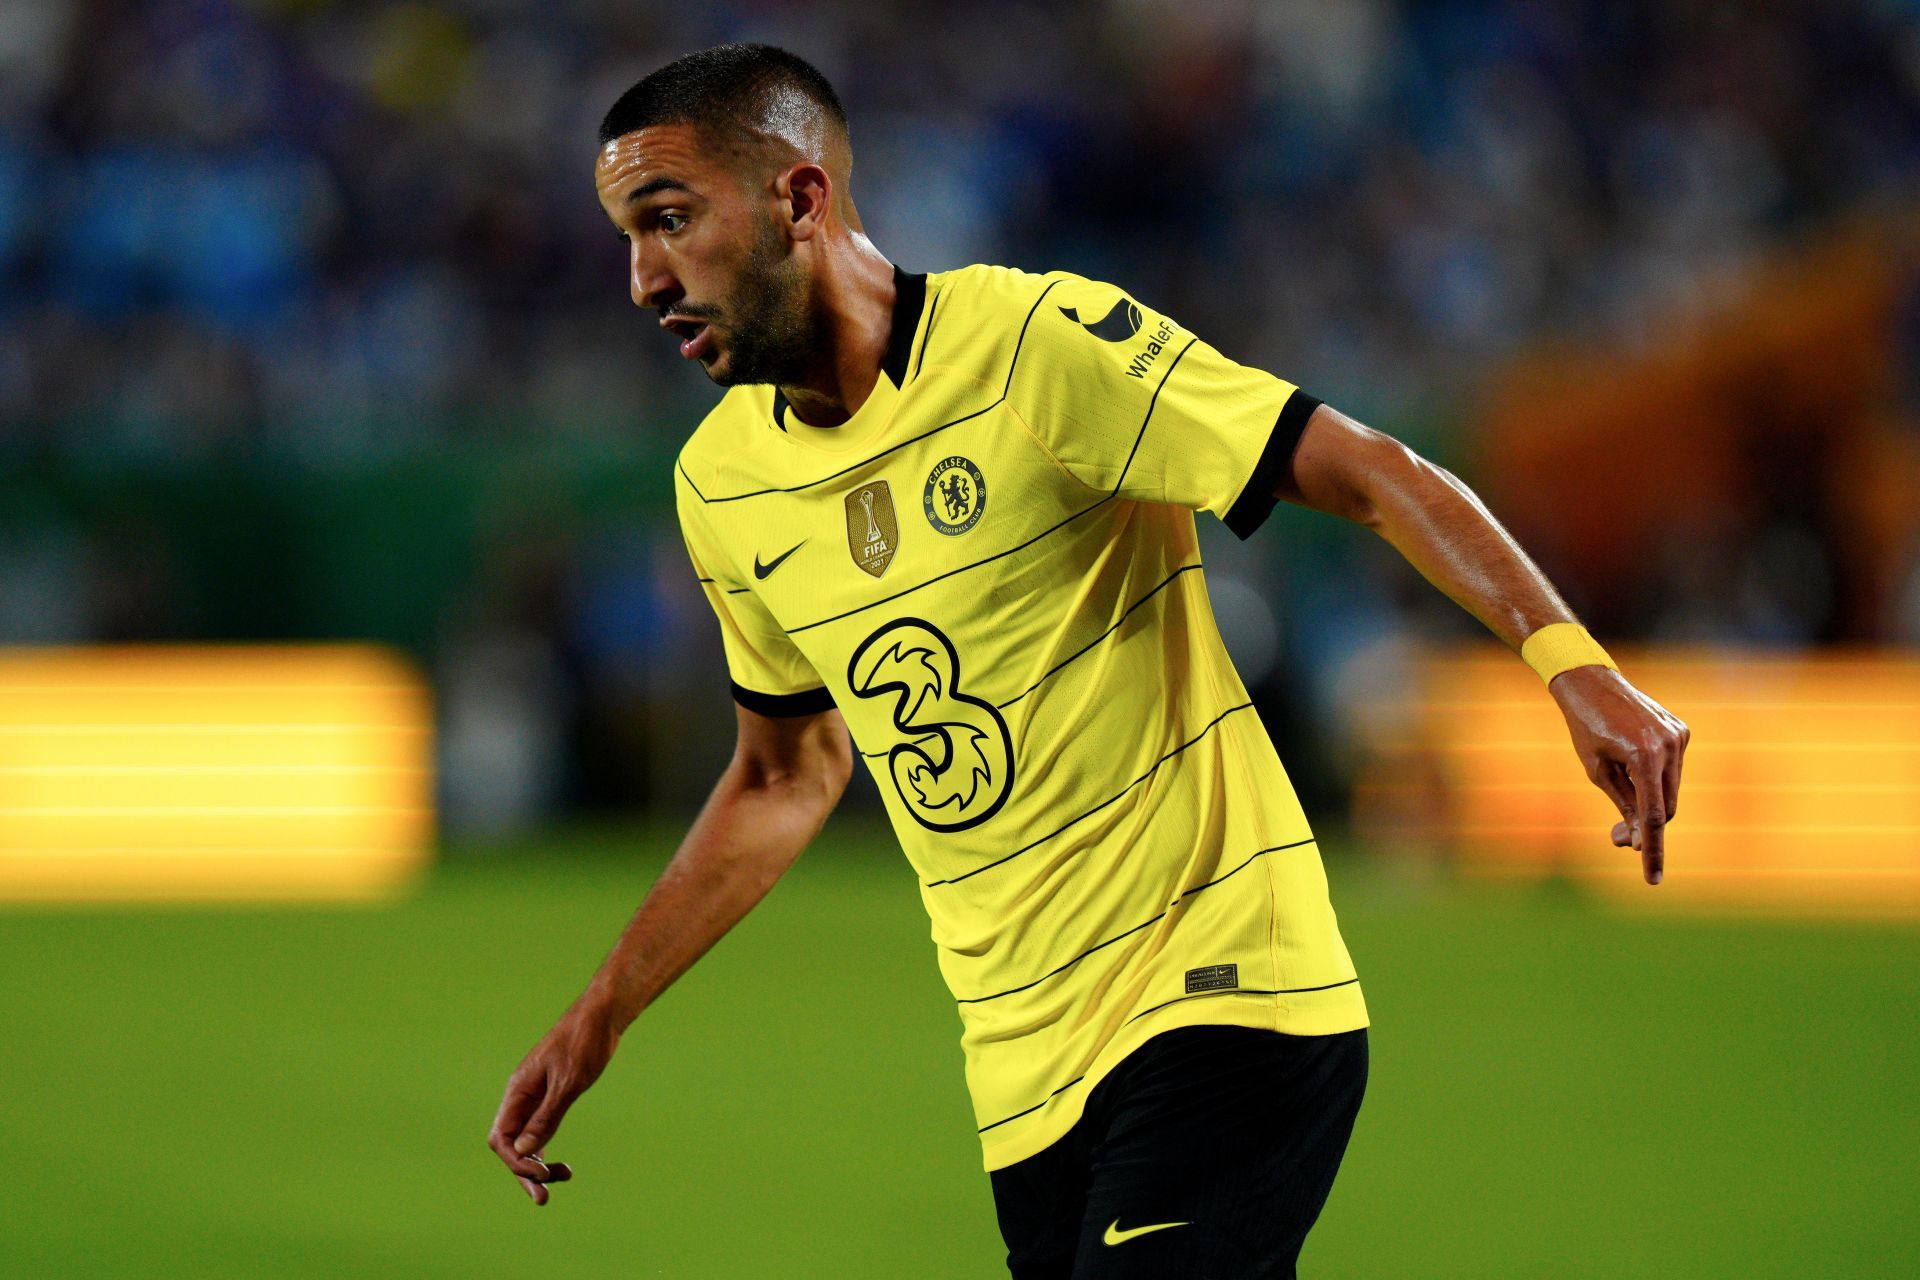 Ziyech has started only one game for Chelsea this season